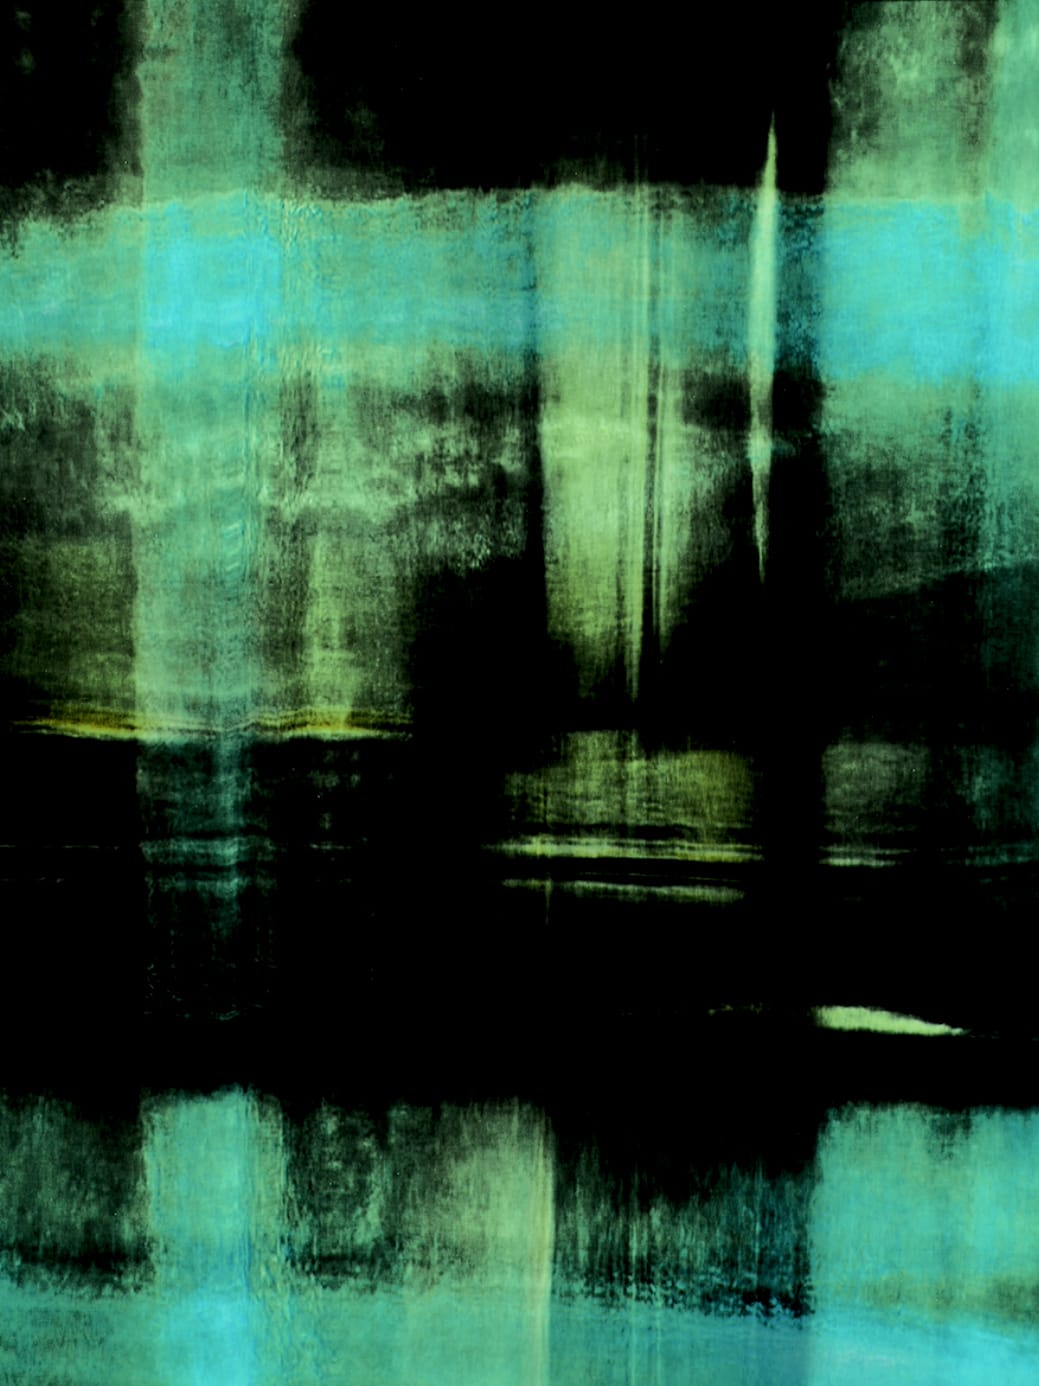 Photography, Scanography by Michael Monney aka acylmx, Abstract Image in Green